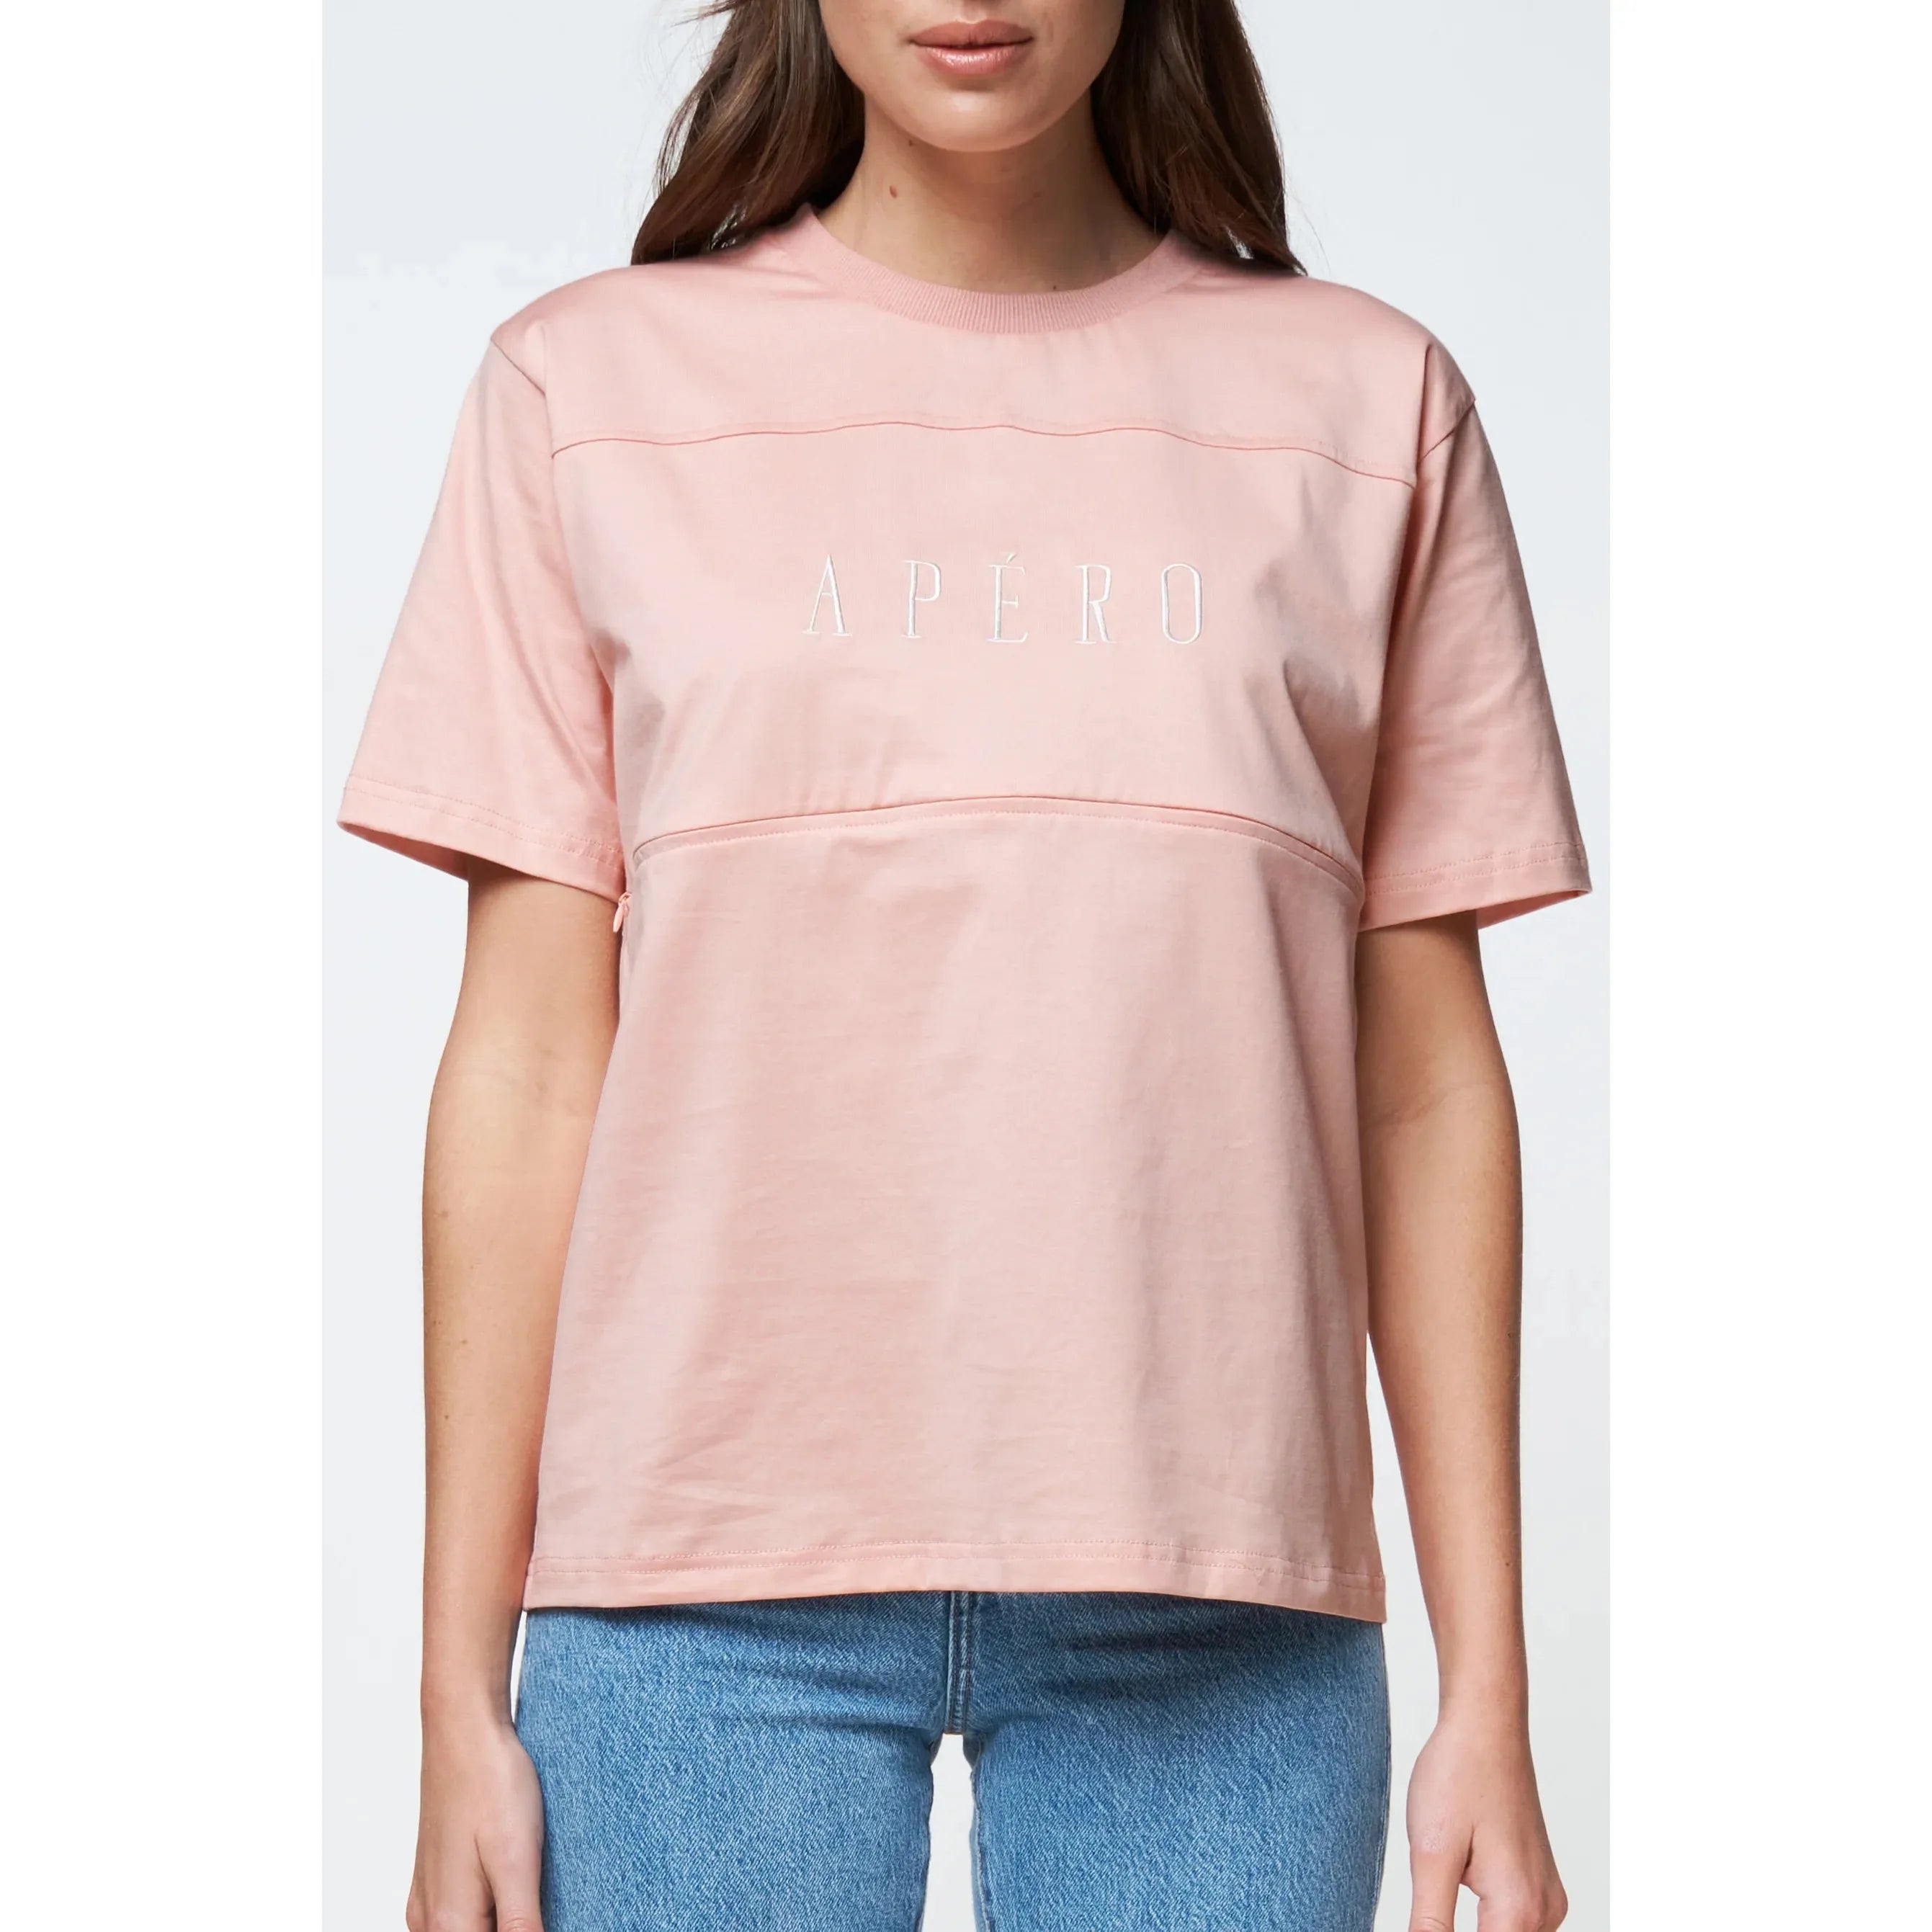 Riviera Embroidered Panel Tee - Pink / White